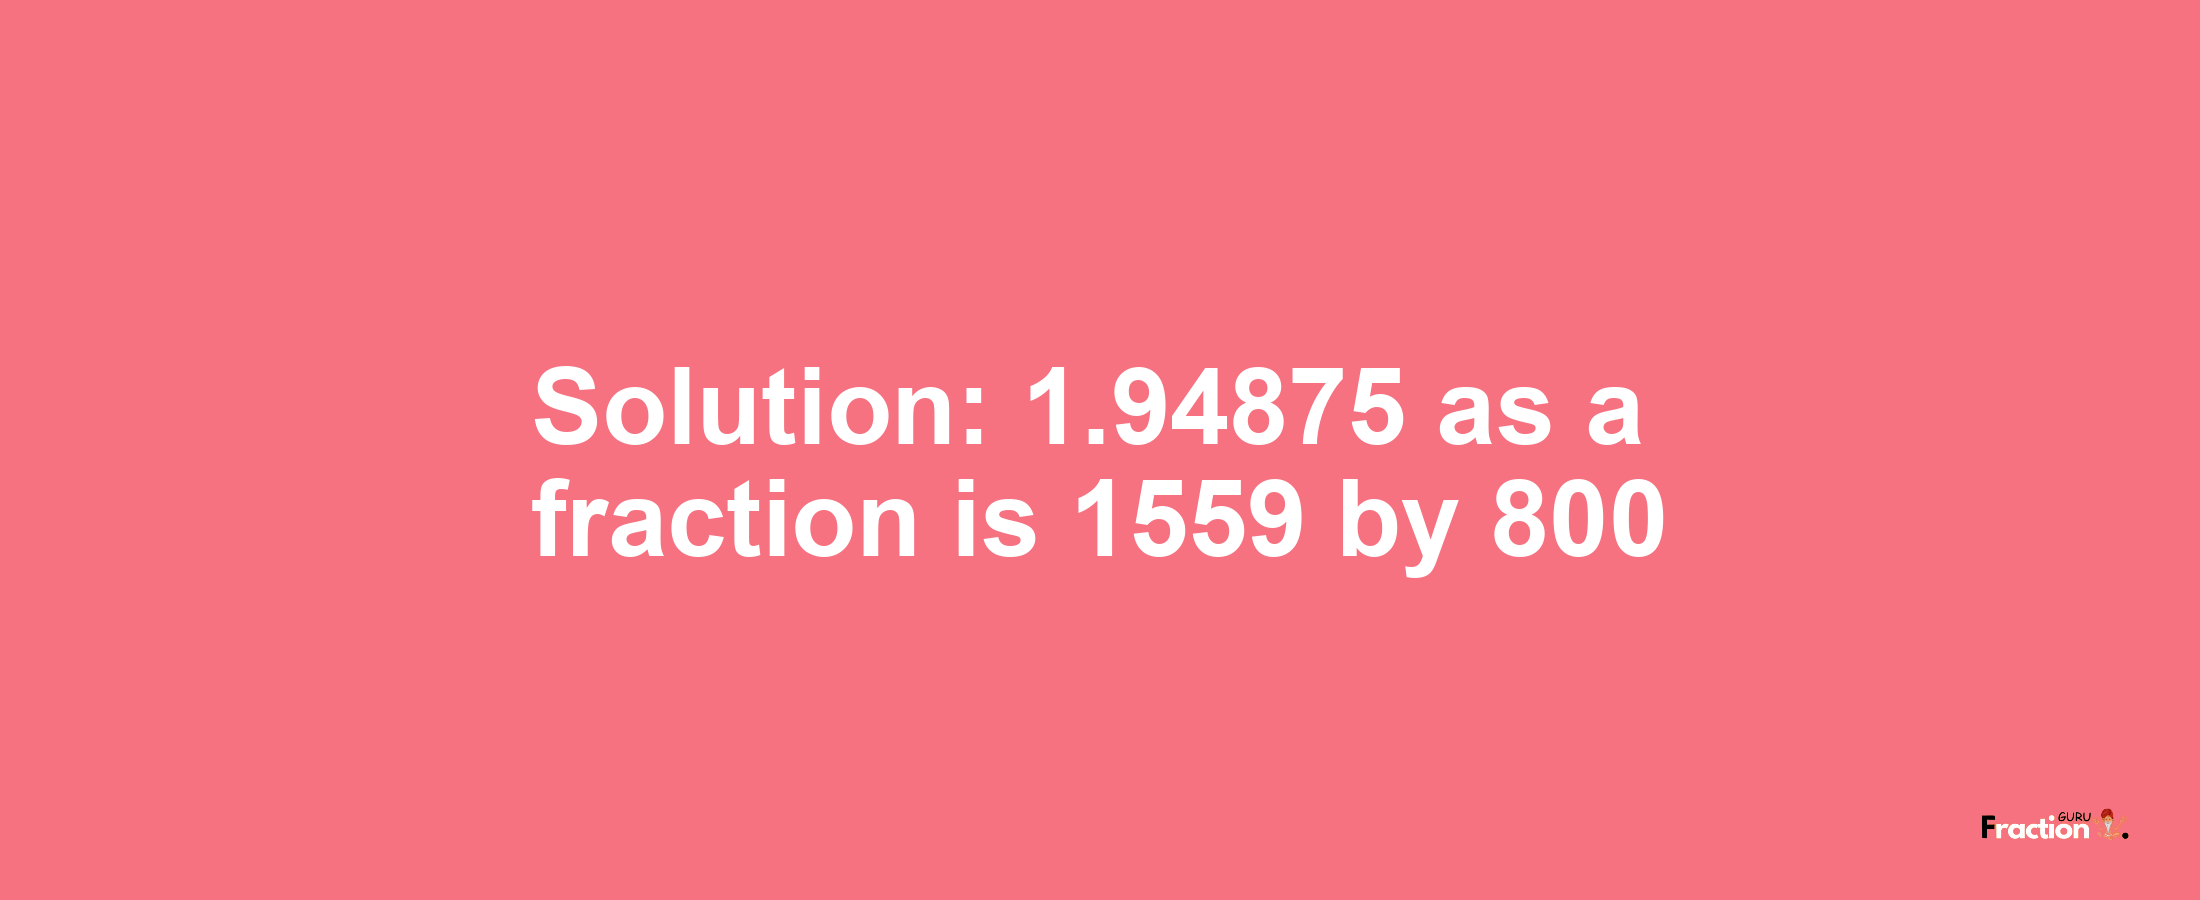 Solution:1.94875 as a fraction is 1559/800